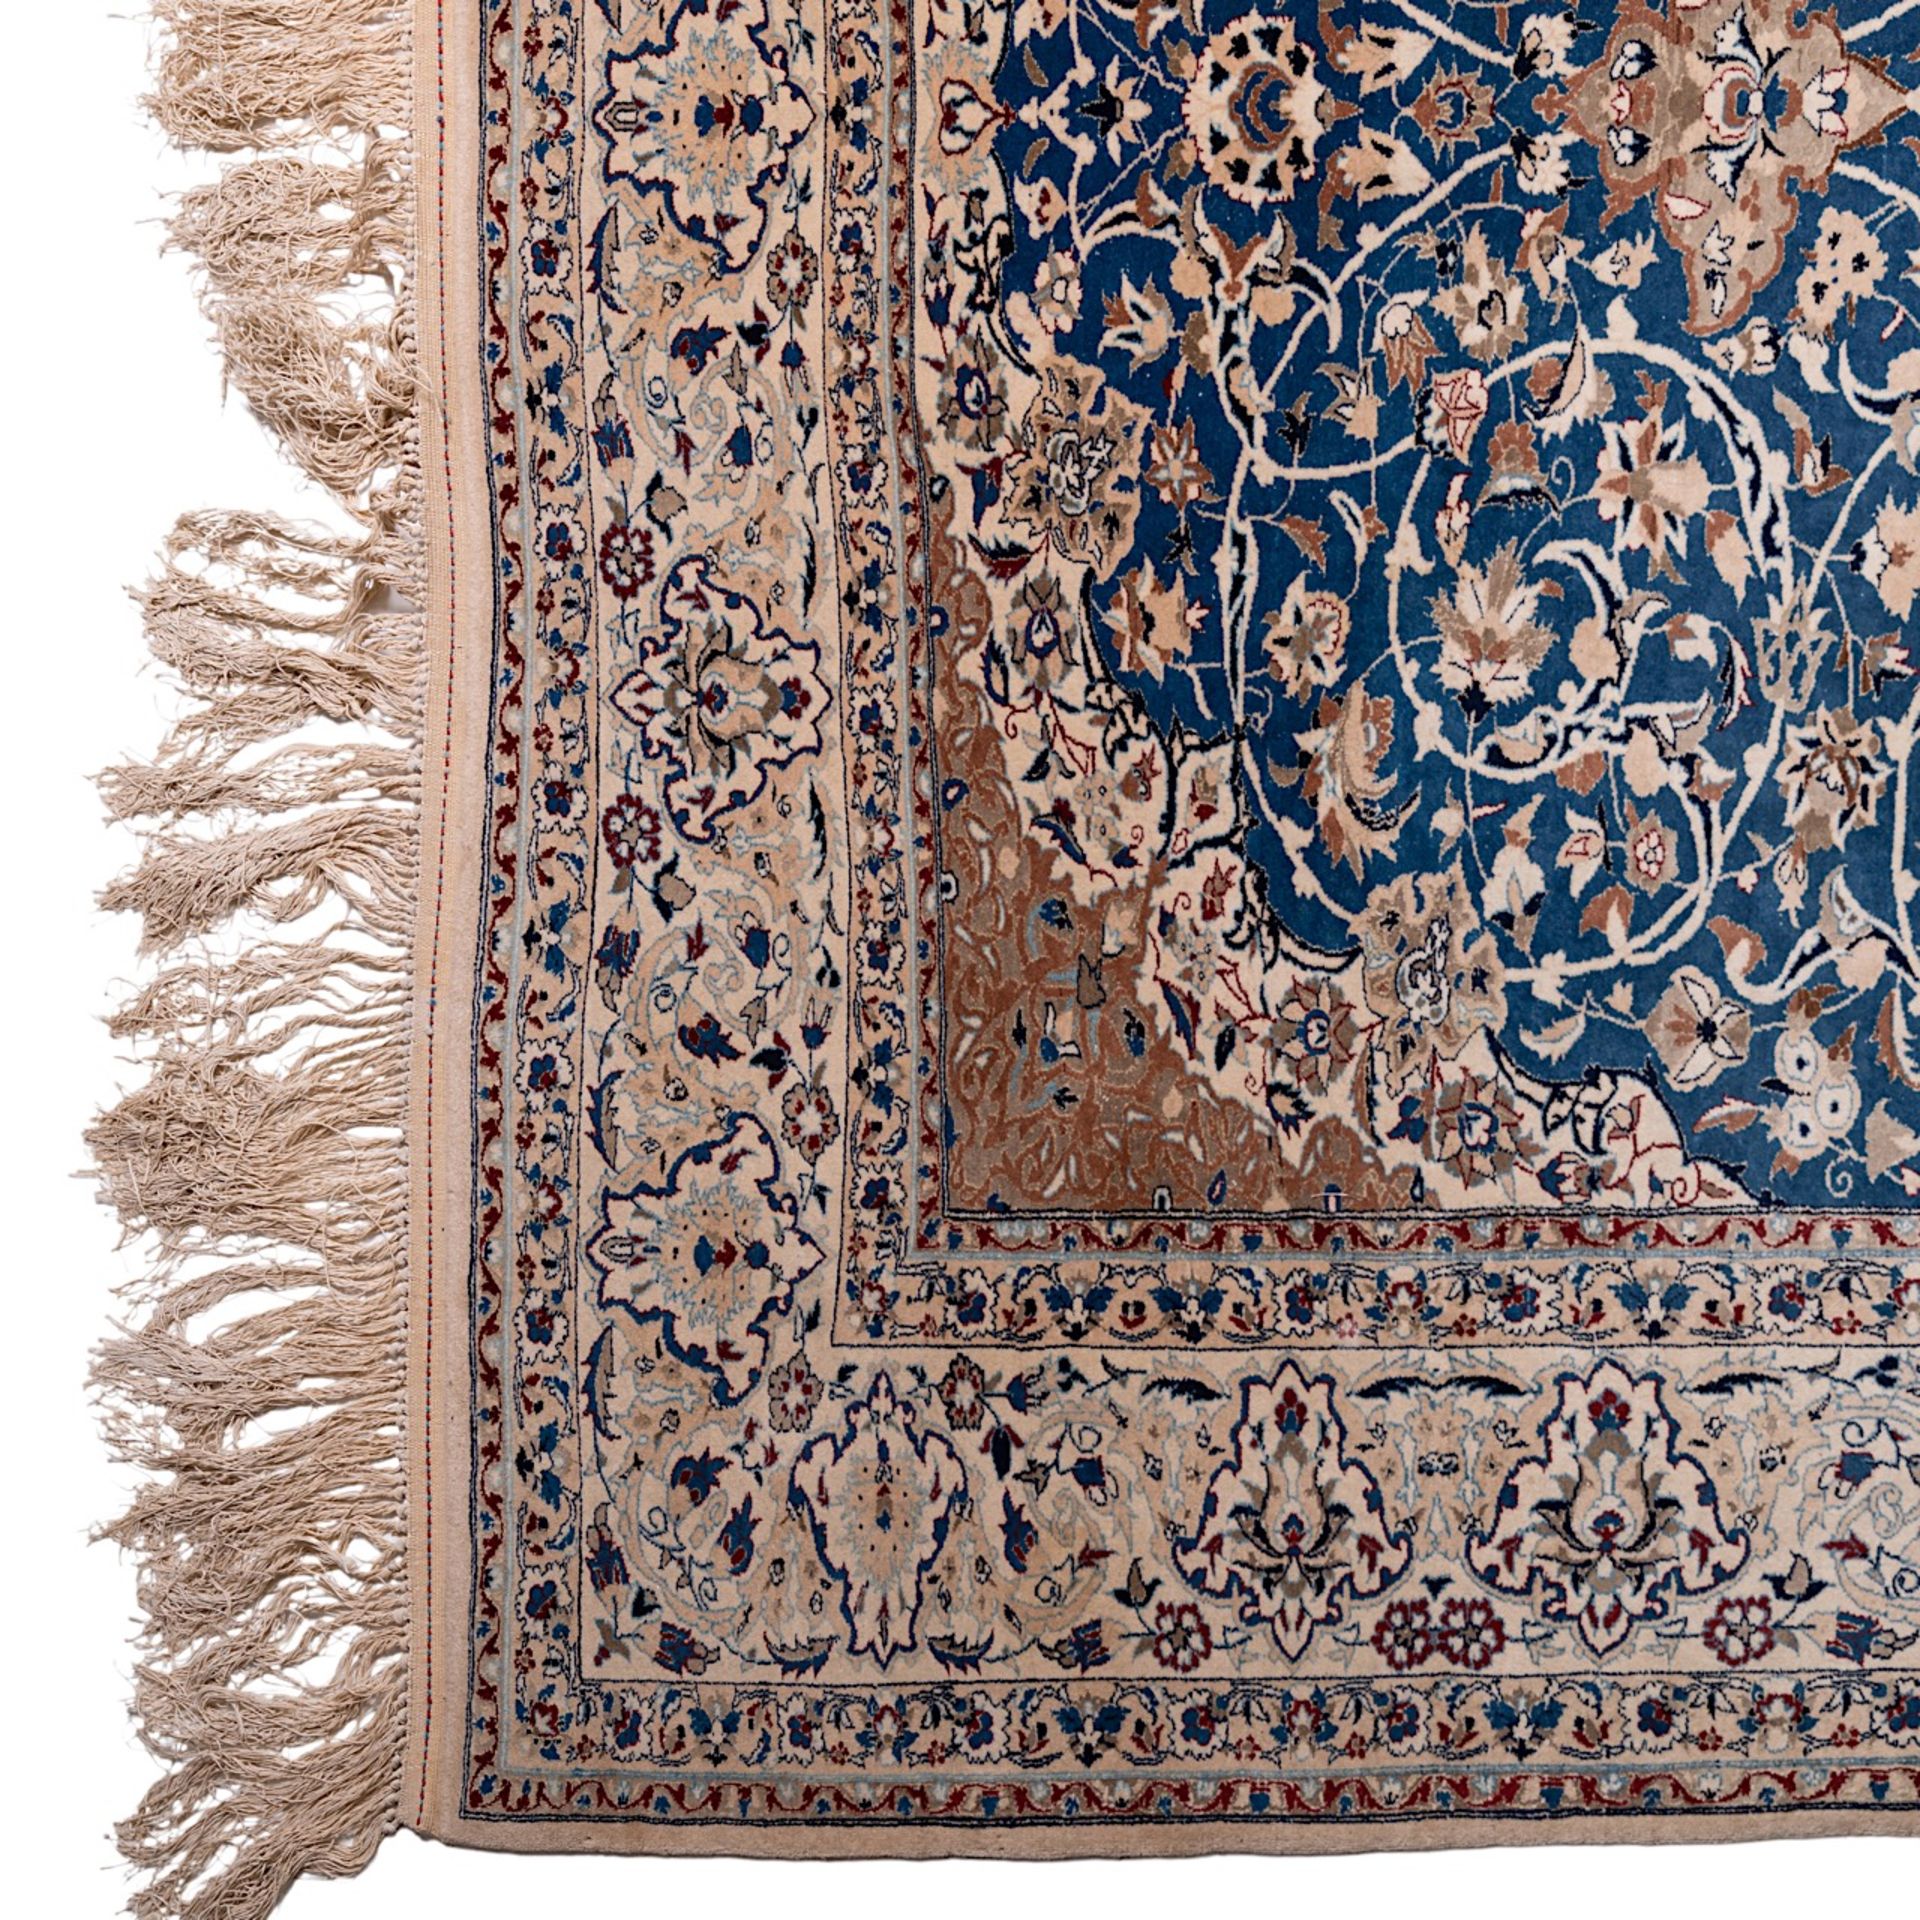 A Persian Nain woollen rug with a central medallion, 229 x 169 cm - Image 5 of 8